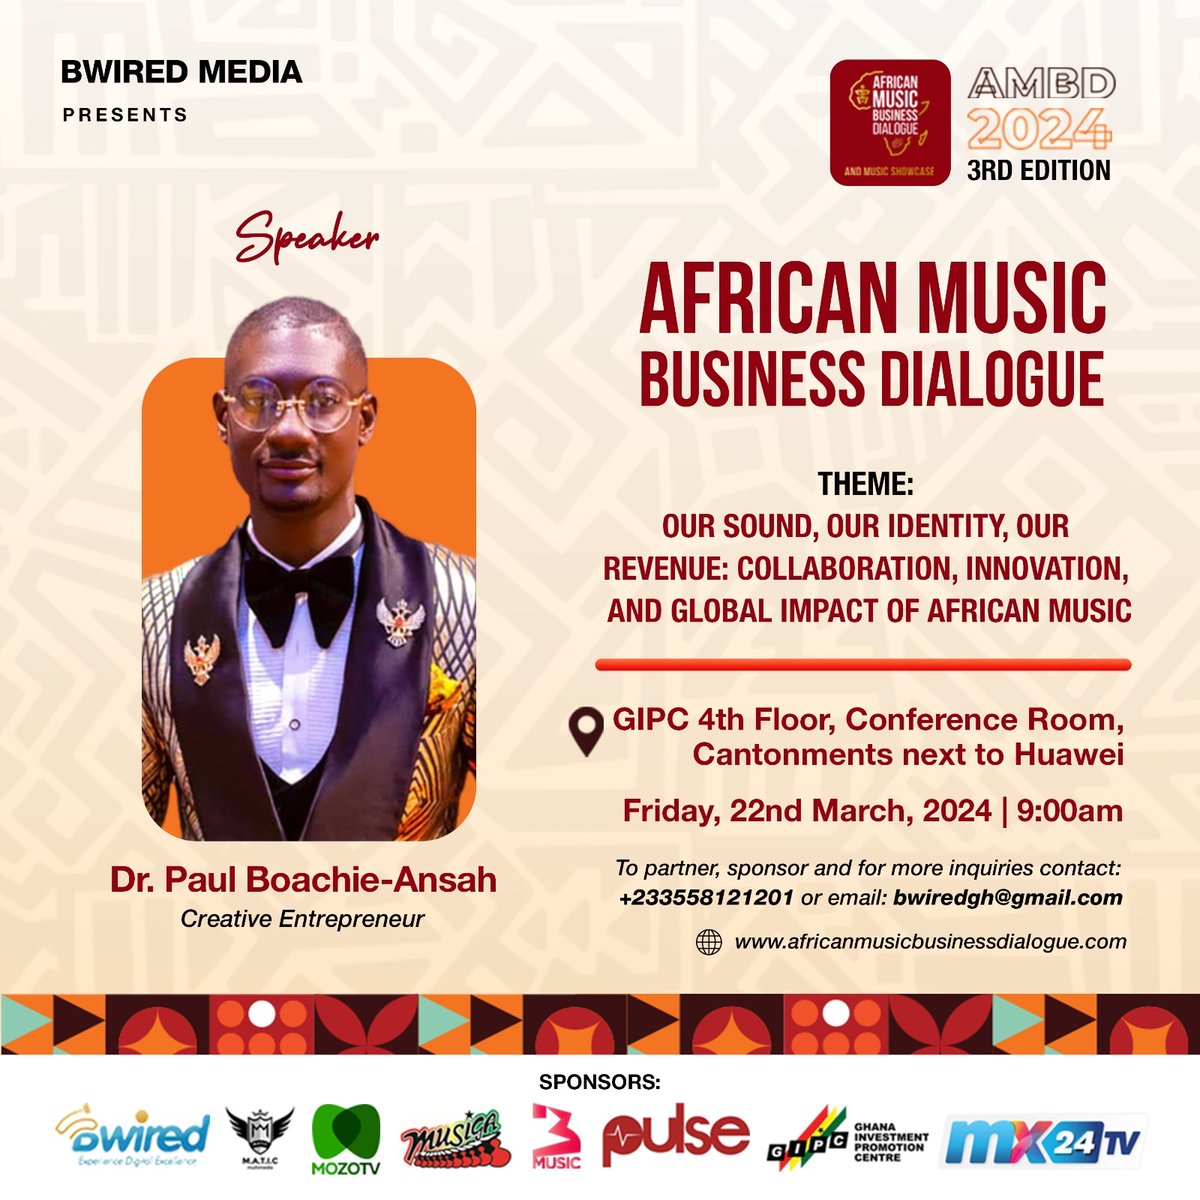 I am elated to be one of the guest speakers at the African Music Business Dialogue 2024 at Ghana Investment Promotion Centre on Friday, 22nd of March 2024 at 9:00am prompt. Stay Tuned🔥🔥🔥 #musicbusiness #music #africa #businessdialogue